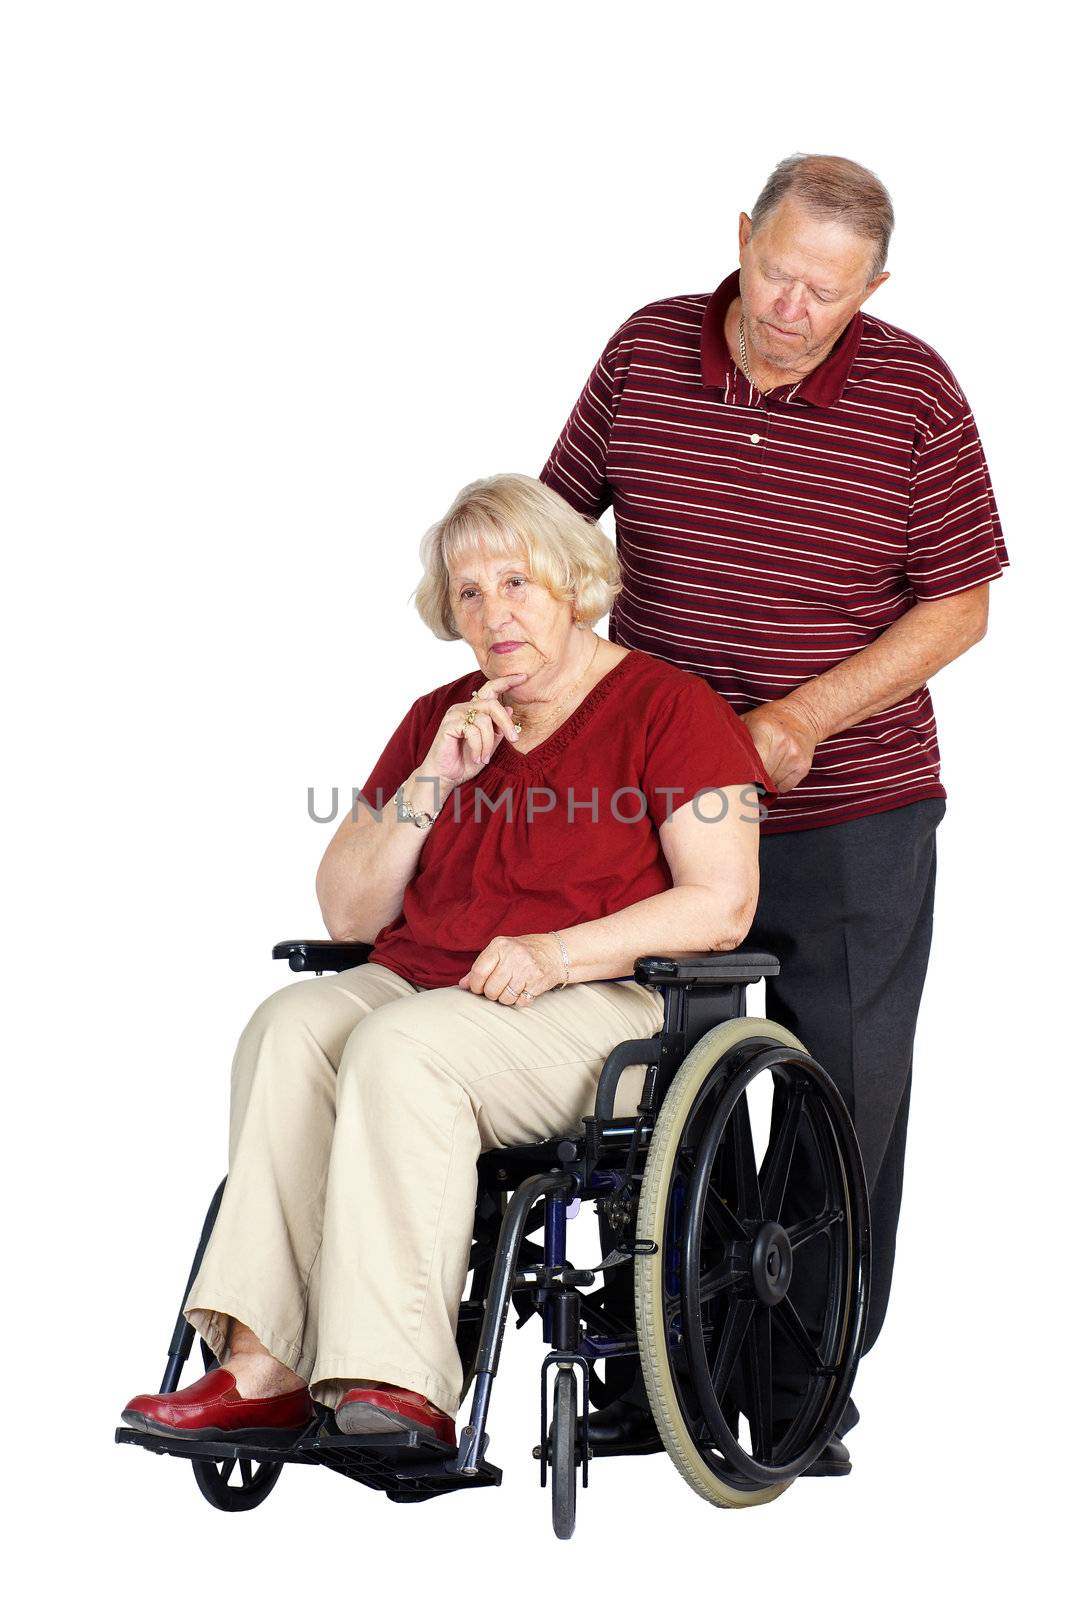 Senior couple with woman in wheelchair by Mirage3